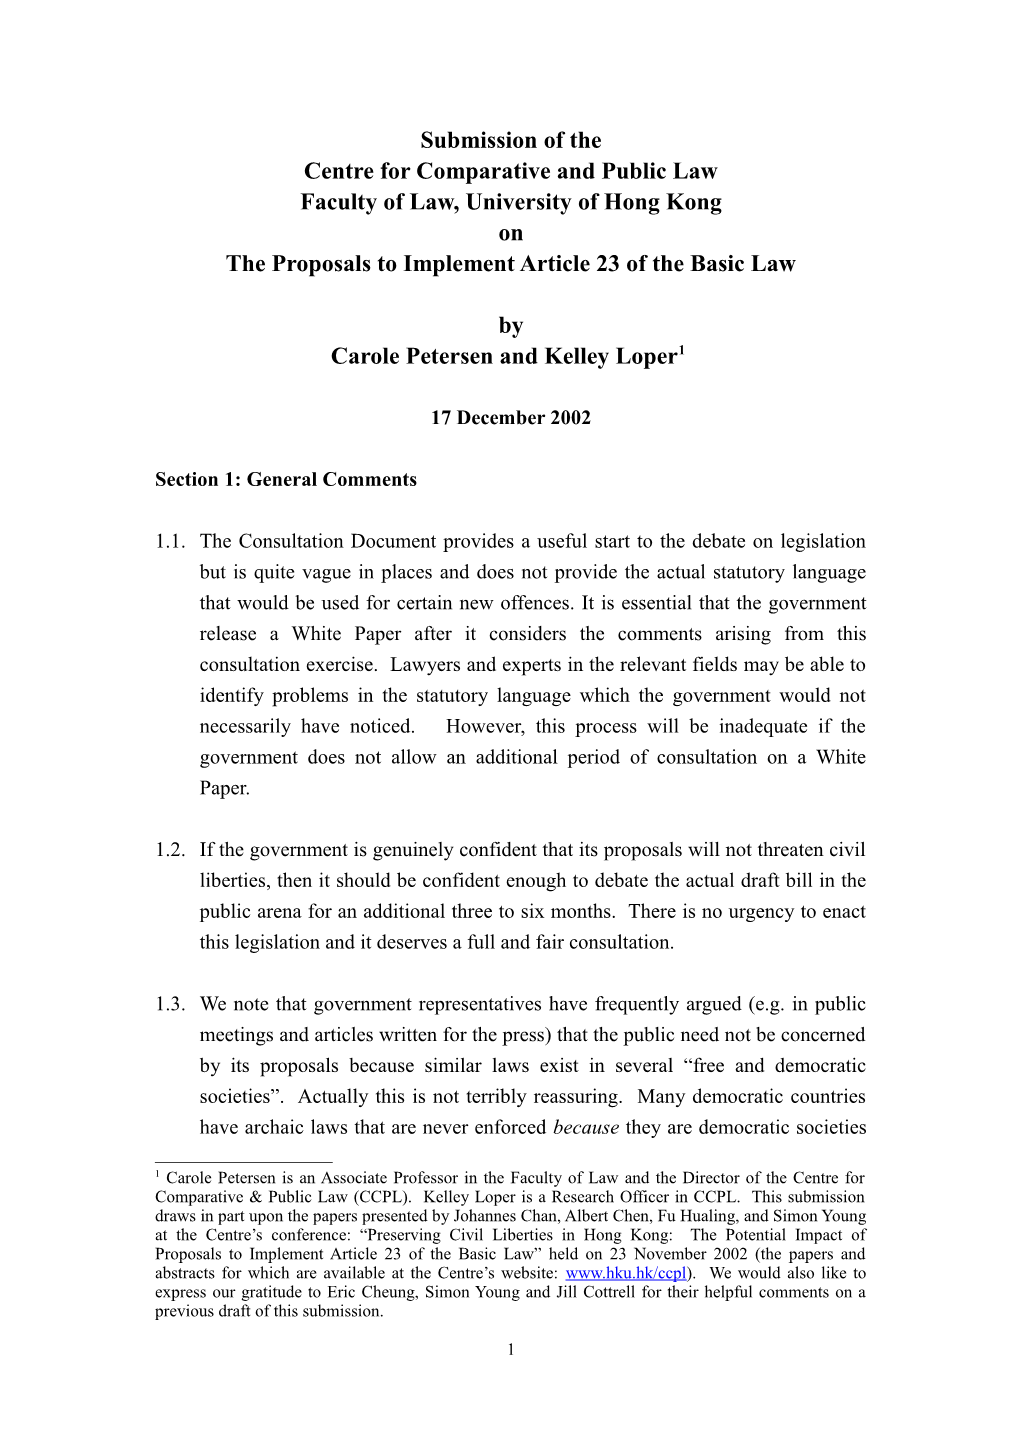 Will Civil Liberties in Hong Kong Survive the Implementation of Article 23